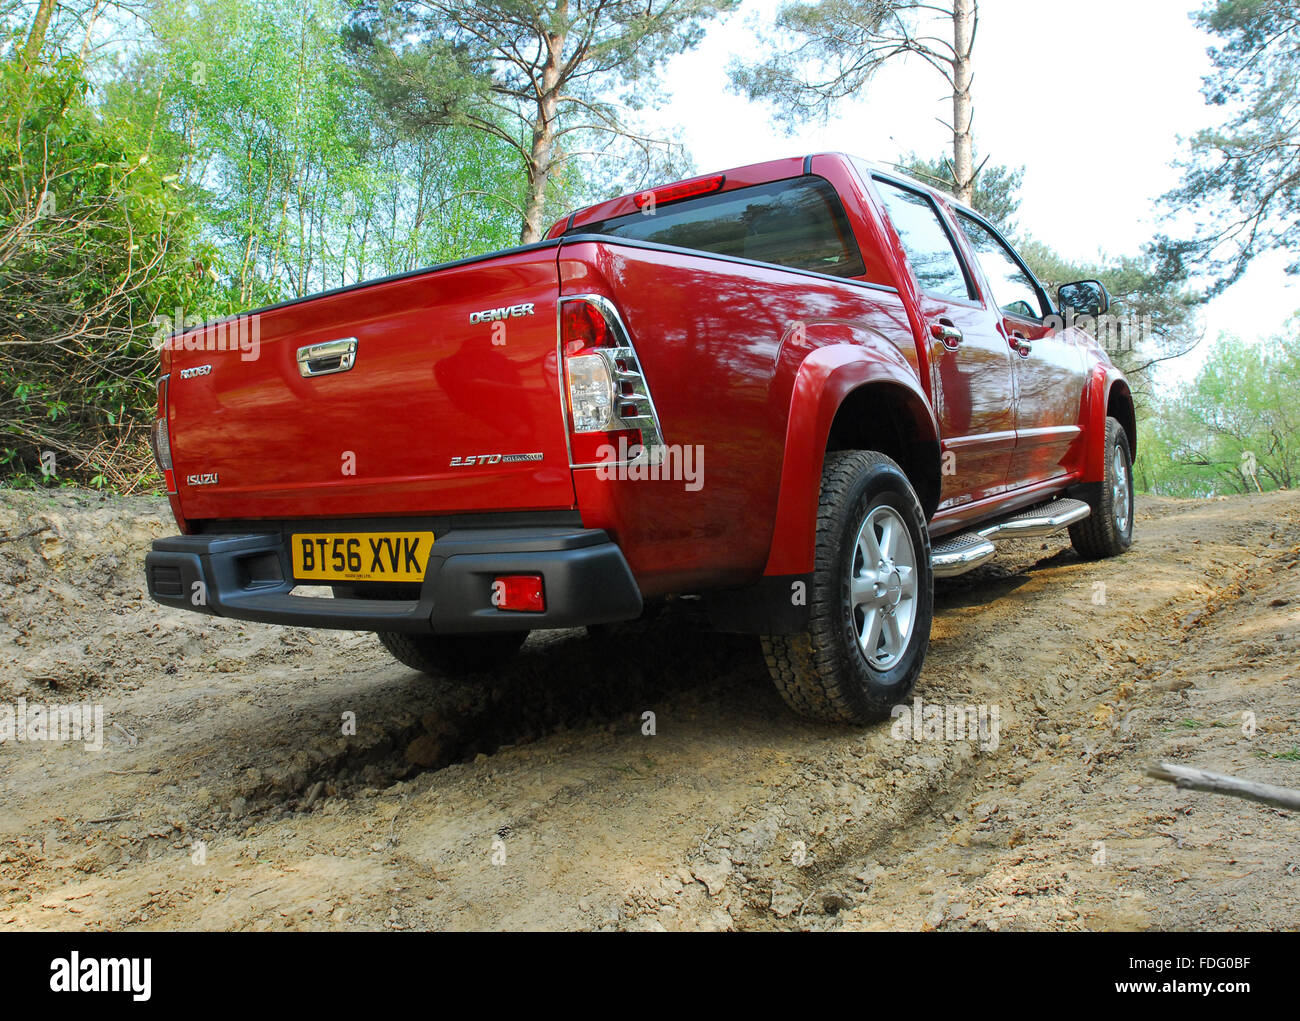 Download Isuzu Pickup Truck High Resolution Stock Photography And Images Alamy PSD Mockup Templates